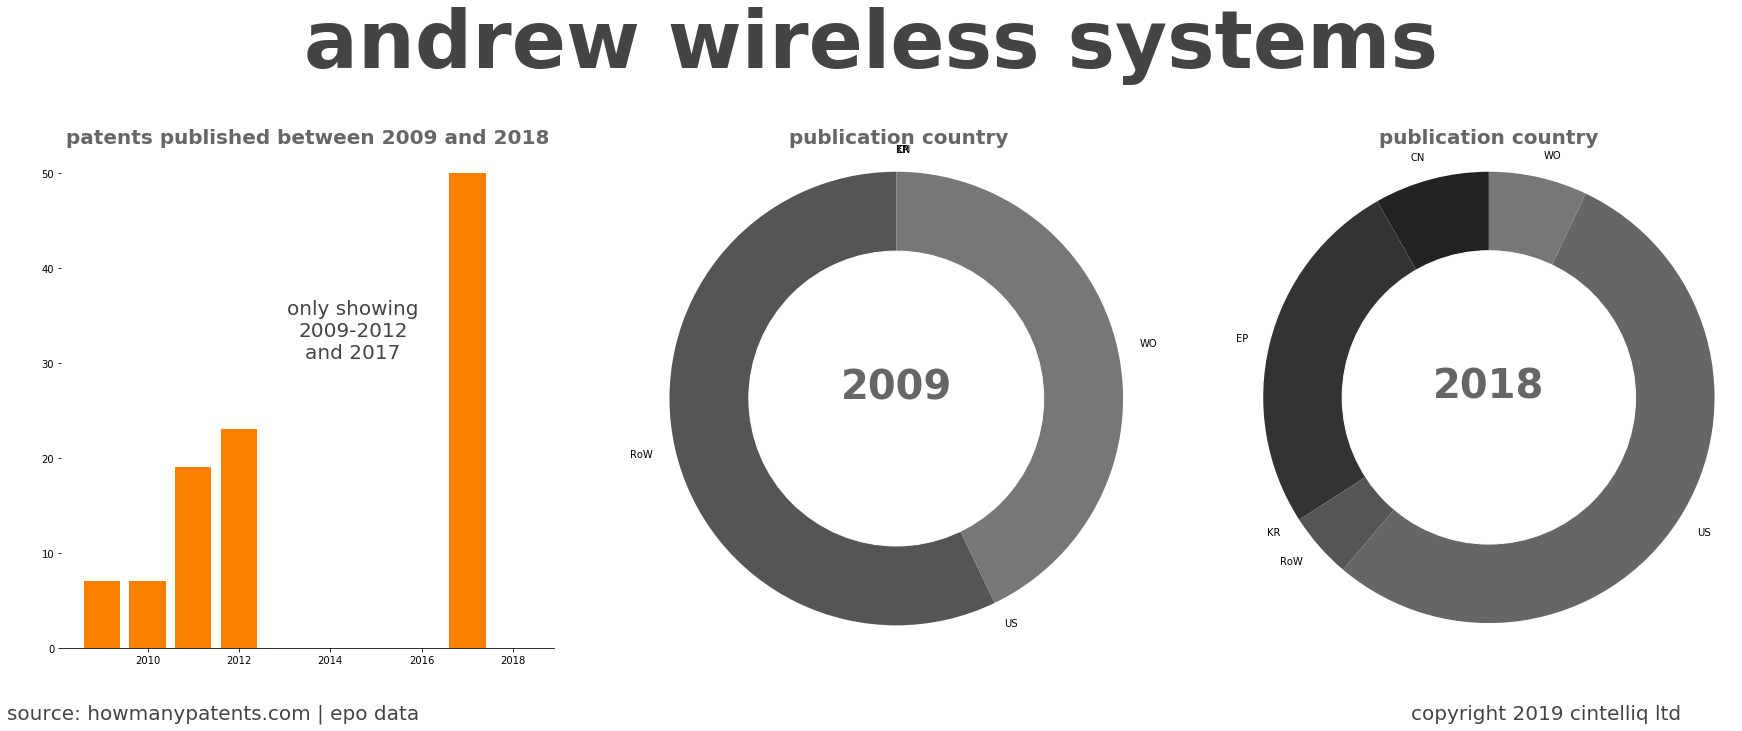 summary of patents for Andrew Wireless Systems